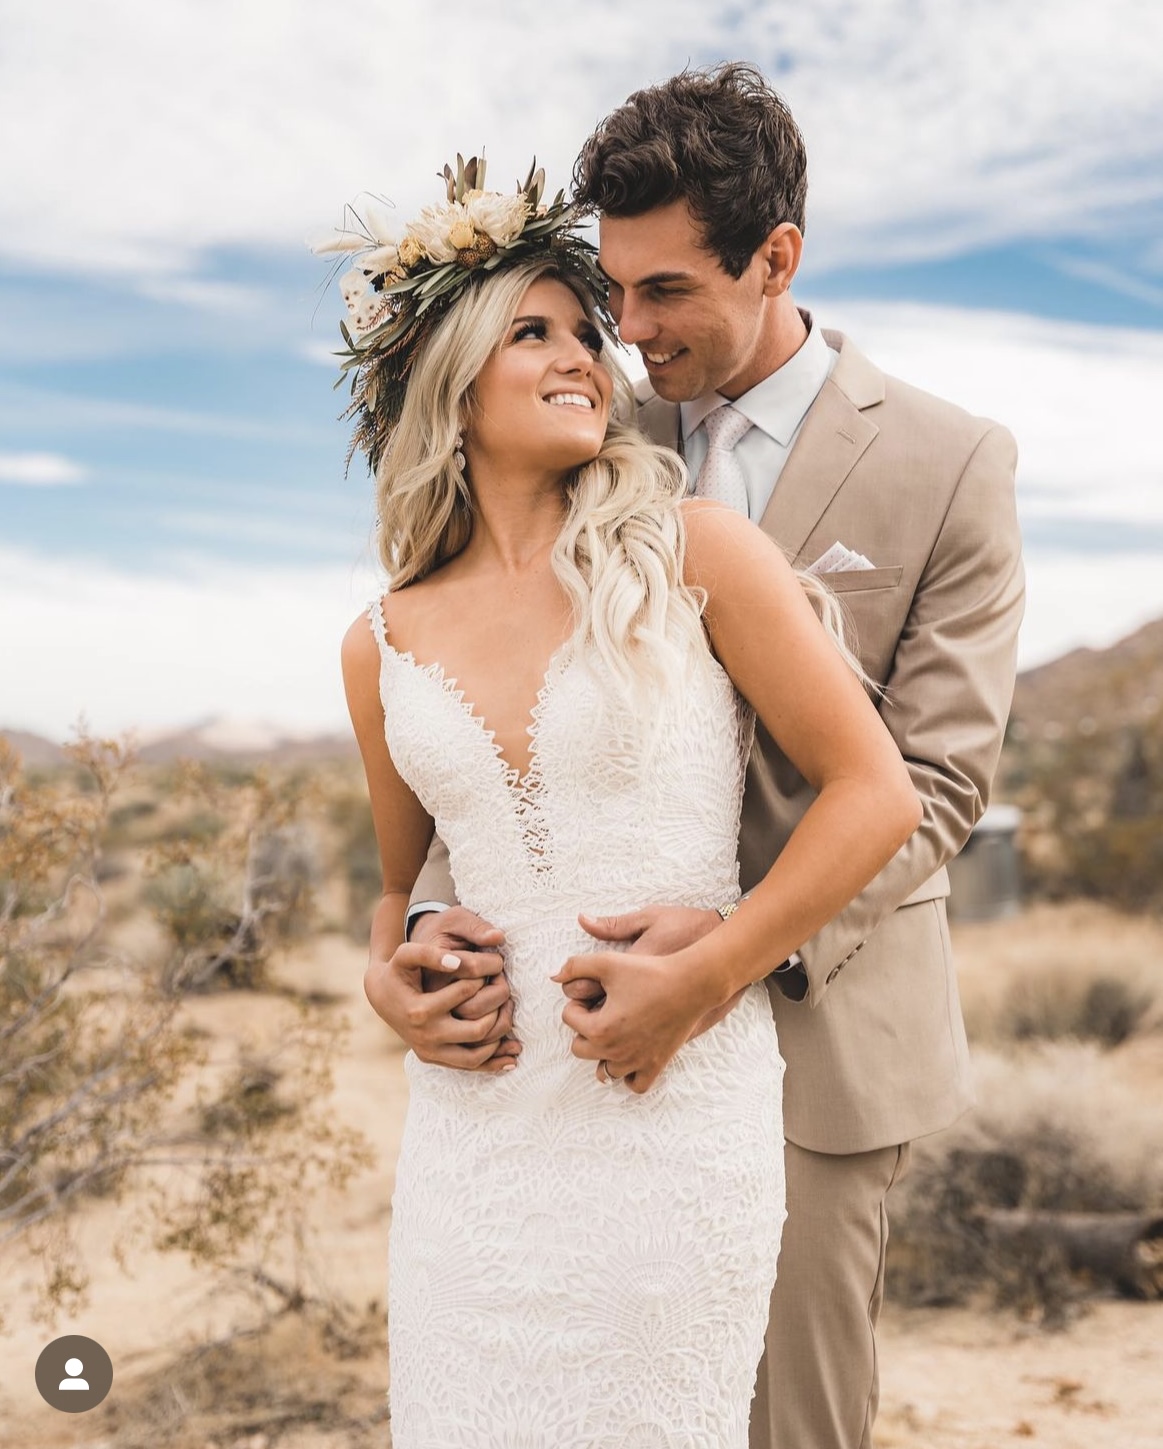 Groom in a tan spring wedding suit holding his bride in a desert field